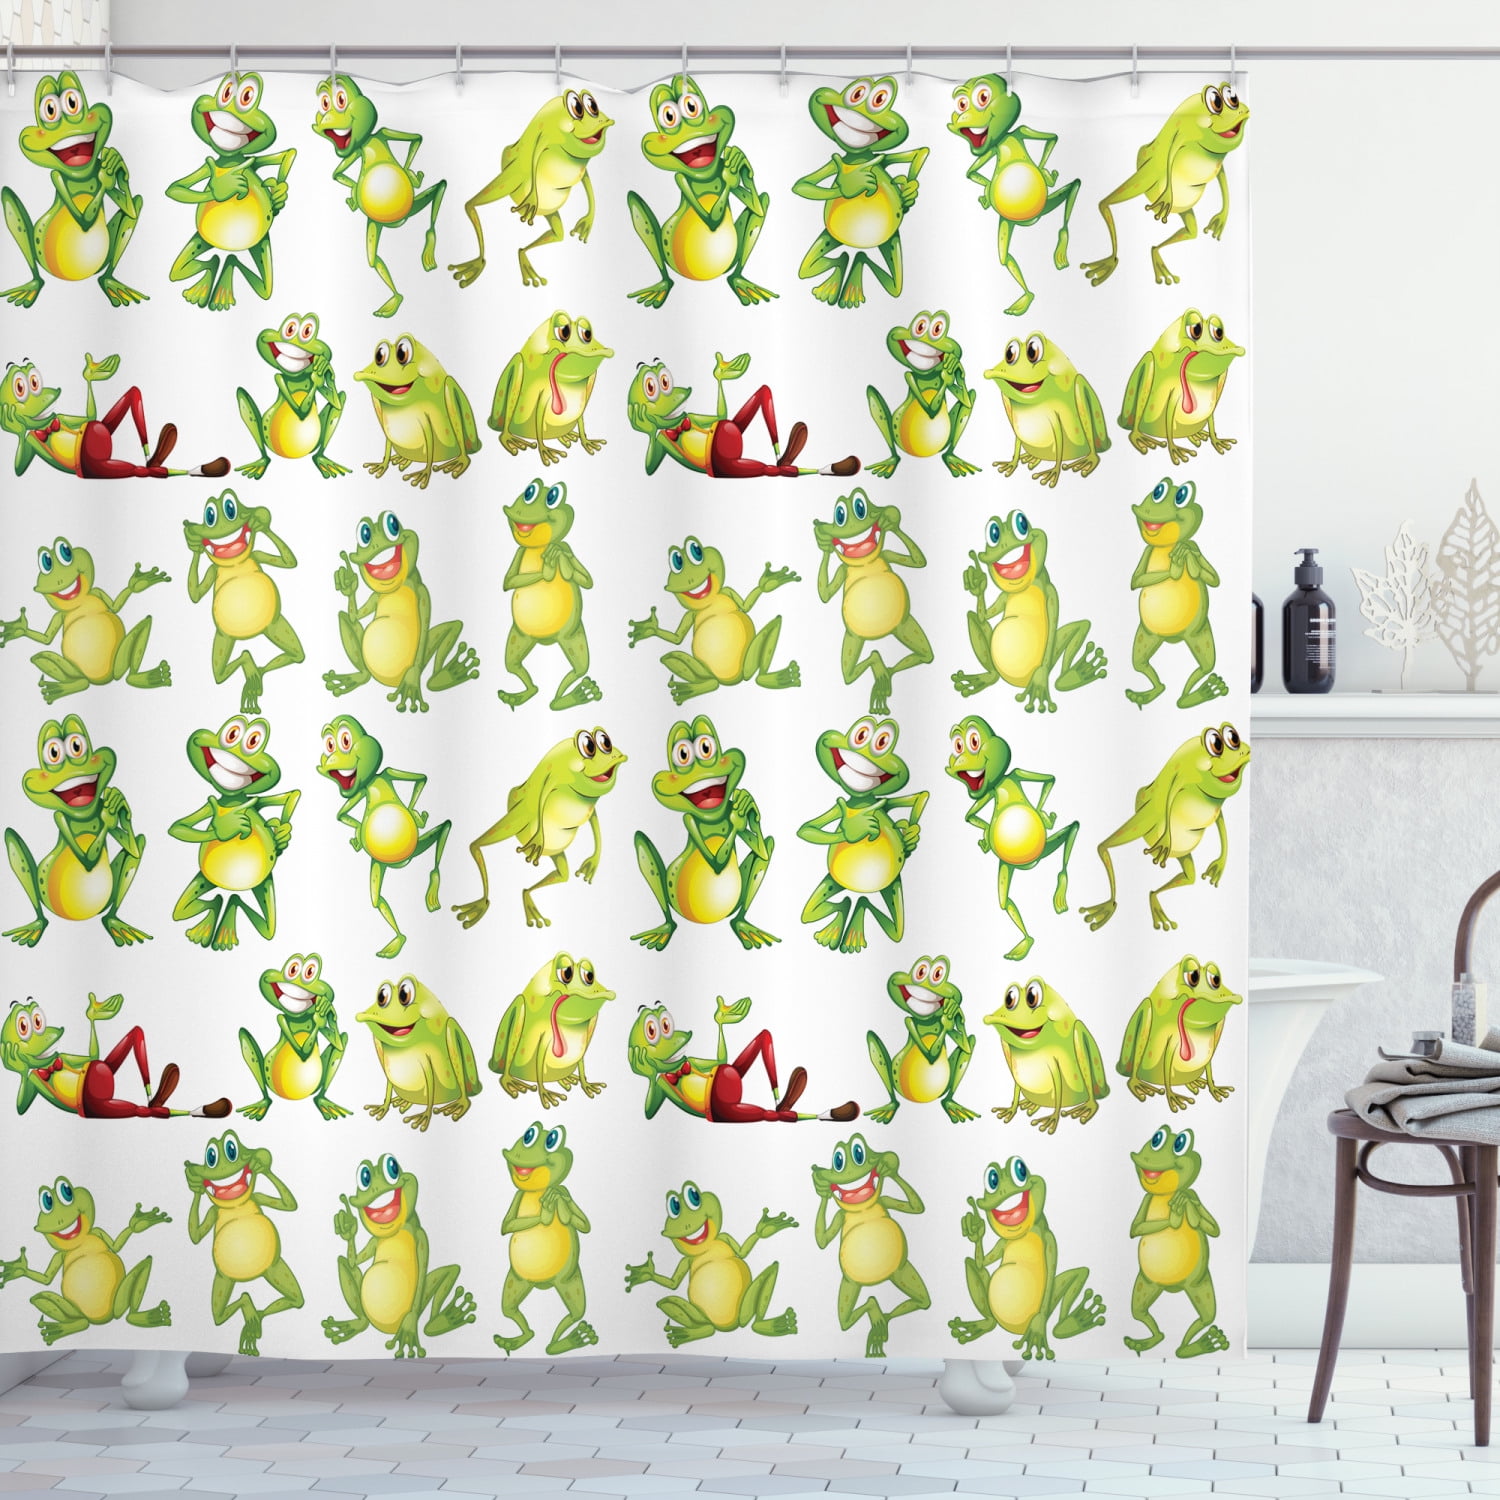 Cute and kind frog's expression pack Printing 3D Blockout Curtains Fabric Window 